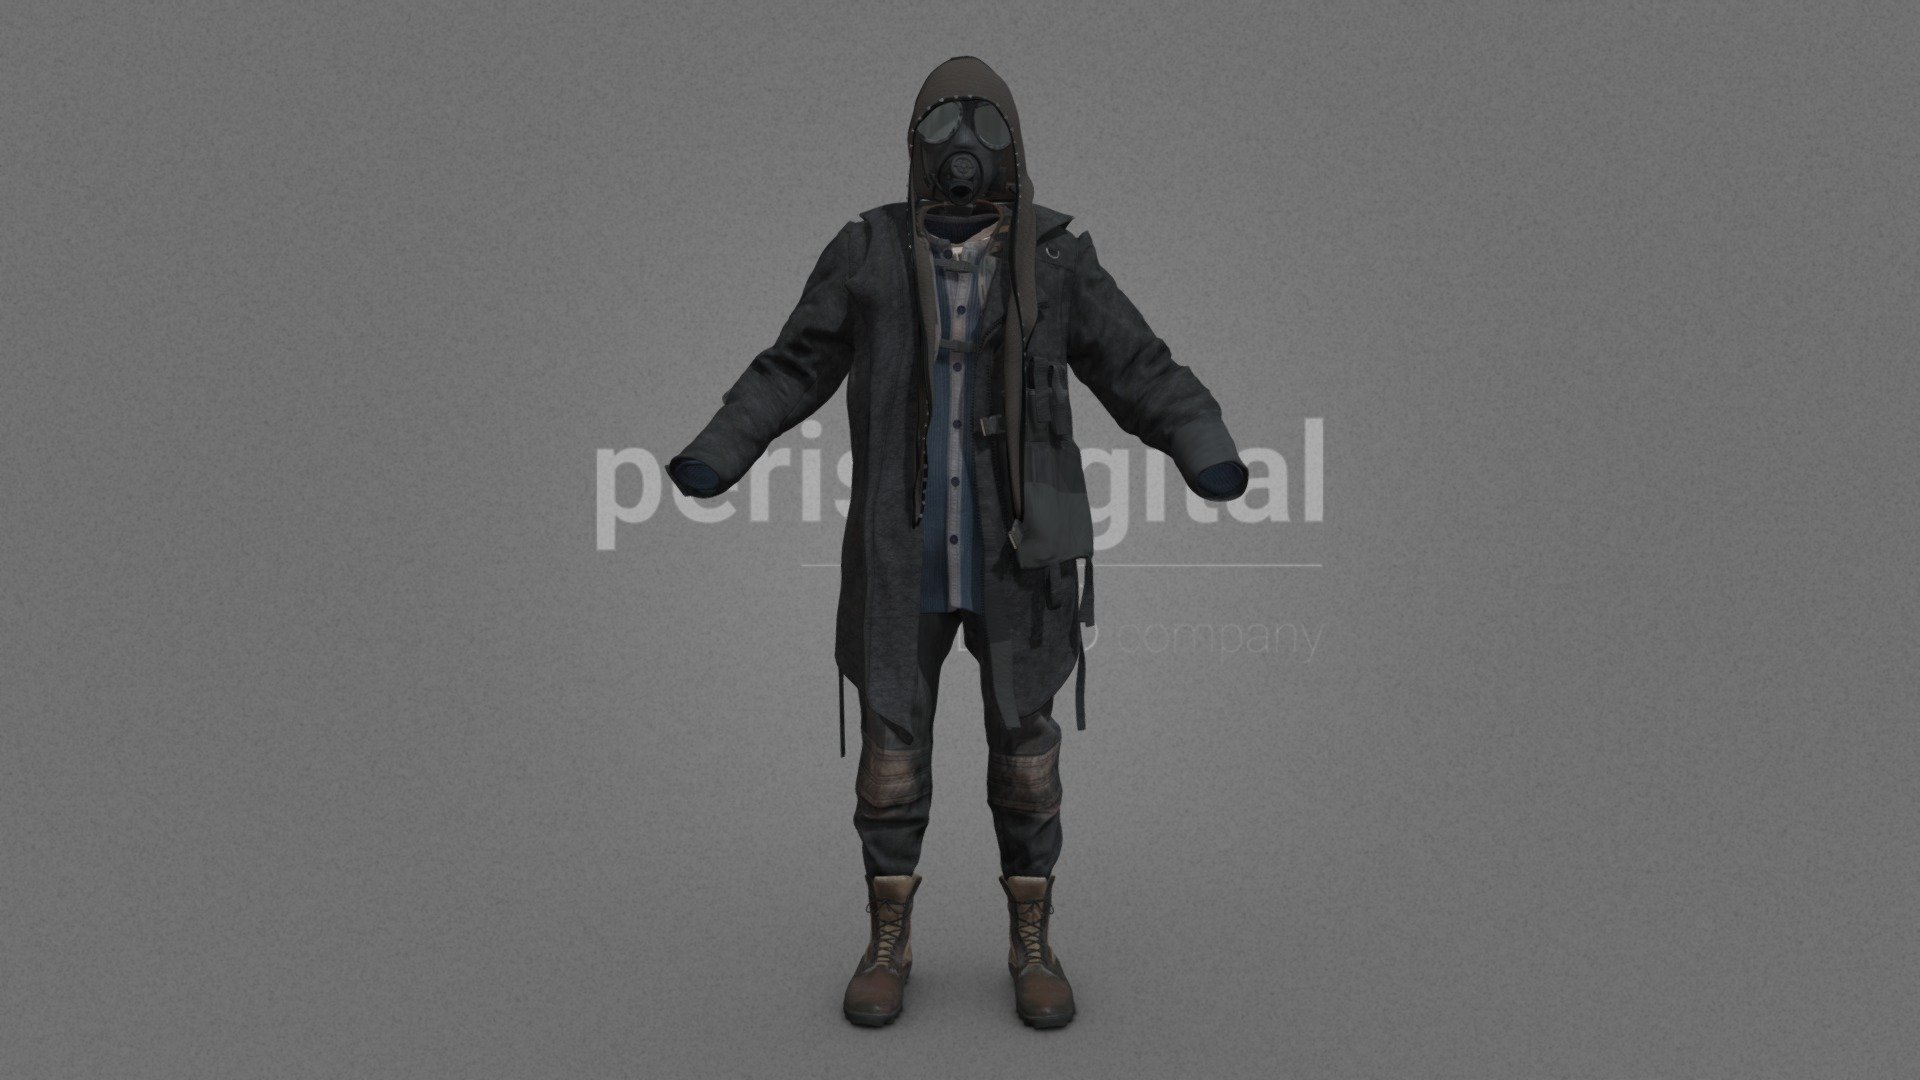 Grey knitted cap with black leather embroidery and silver rivets, gas mask, three-quarter length black suede military jacket with zippered pockets and hood, blue wool sweater buttoned, beige short sleeve mesh shirt, grey military vest, brown trousers with suede knee patches, brown military leather boots with lace




They are optimized for use in 3D scenes of high polygonalization and optimized for rendering

We do not include characters, but they are positioned for you to include and adjust your own character

They have a model LOW (_LODRIG) inside the Blender file (included in the AdditionalFiles), which you can use for vertex weighting or cloth simulation and thus, make the transfer of vertices or property masks from the LOW to the HIGH** model

We have included the texture maps in high resolution, as well as the Displacement maps, so you can make extreme point of view with your 3D cameras, as well as the Blender file so you can edit any aspect of the set

Enjoy it.

Web: https://peris.digital/ - Wasteland Series - Model 06 - Buy Royalty Free 3D model by Peris Digital (@perisdigital) 3d model